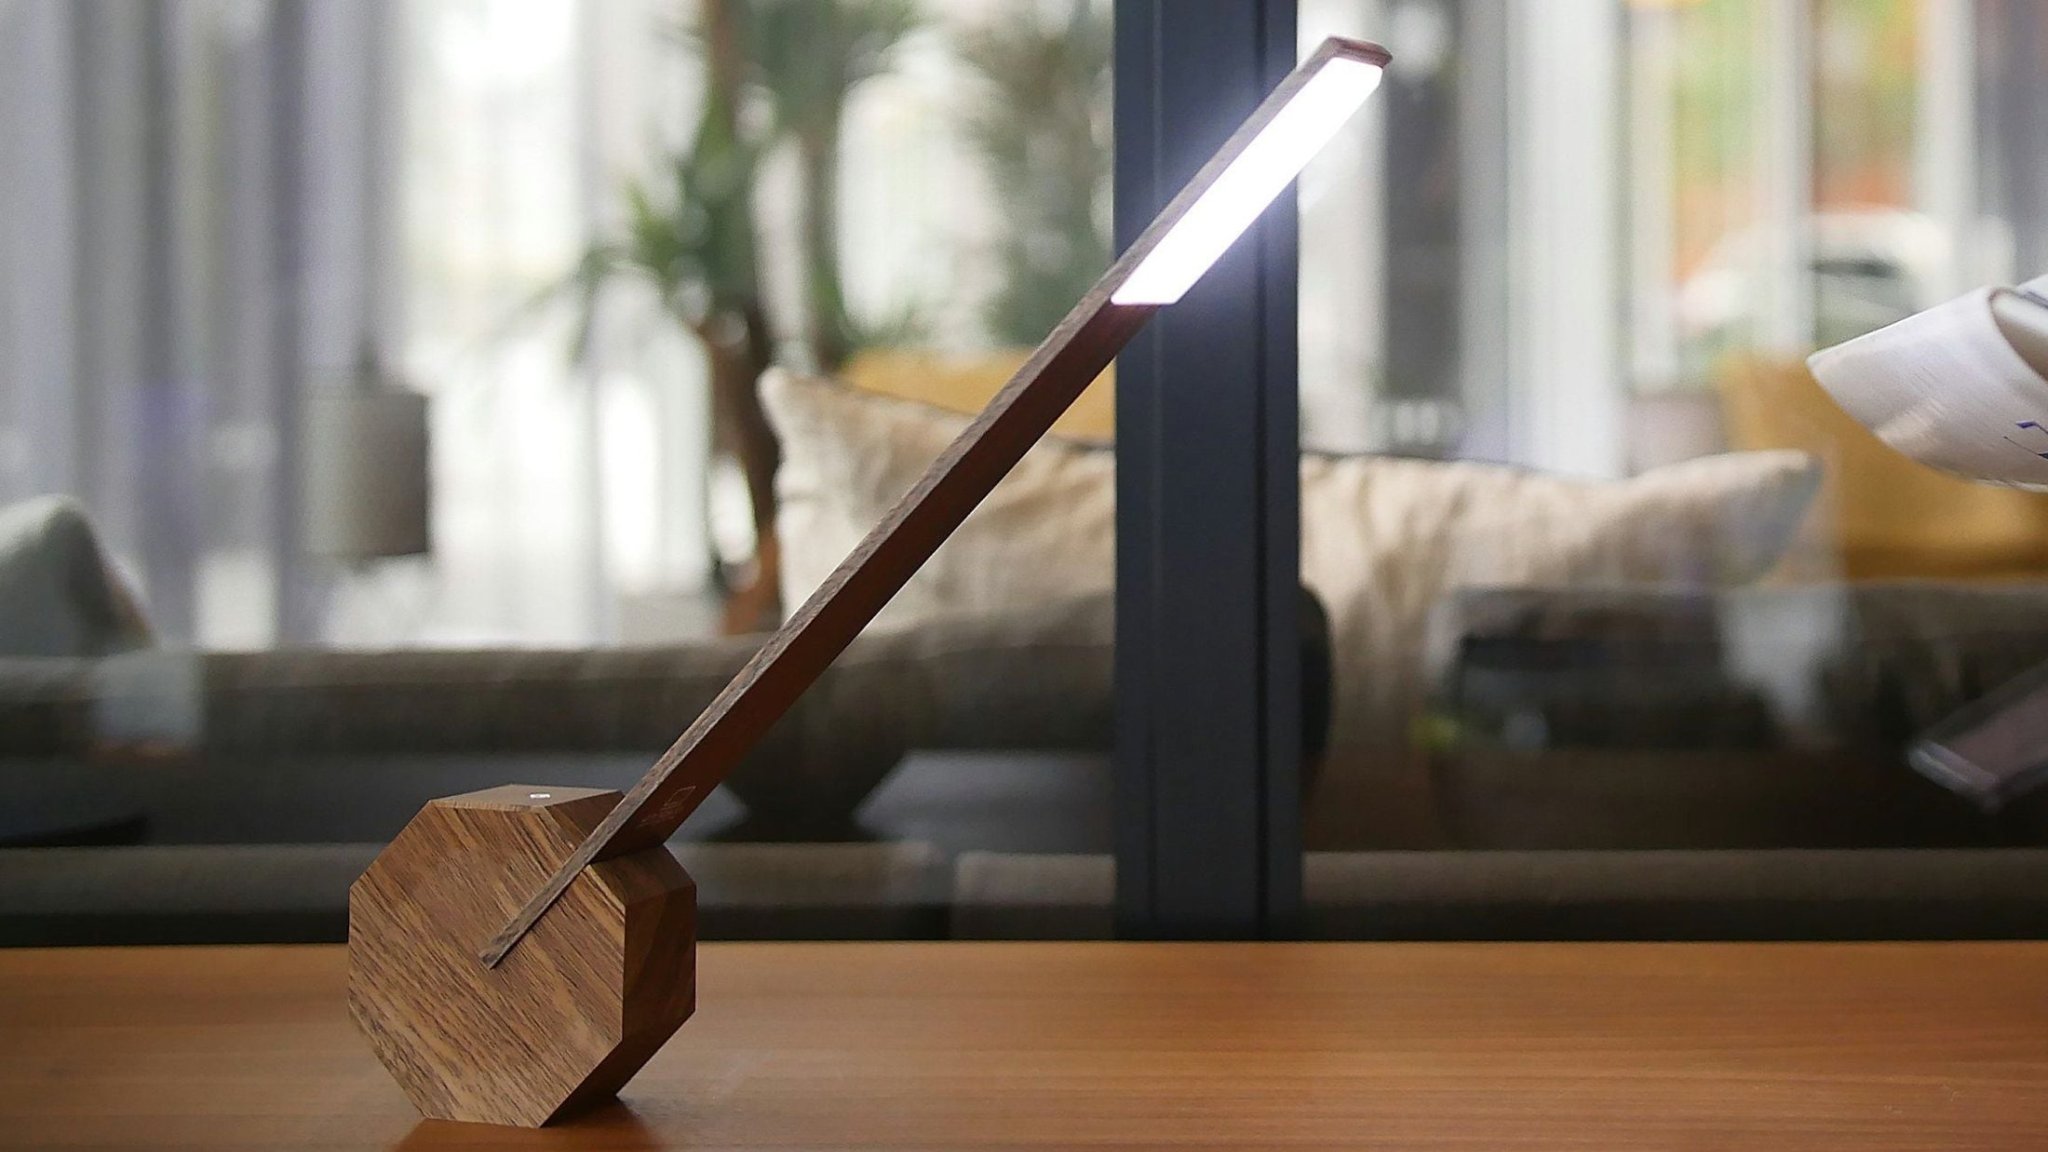 Gingko Octagon One Rechargeable Desk Light works at three different angles